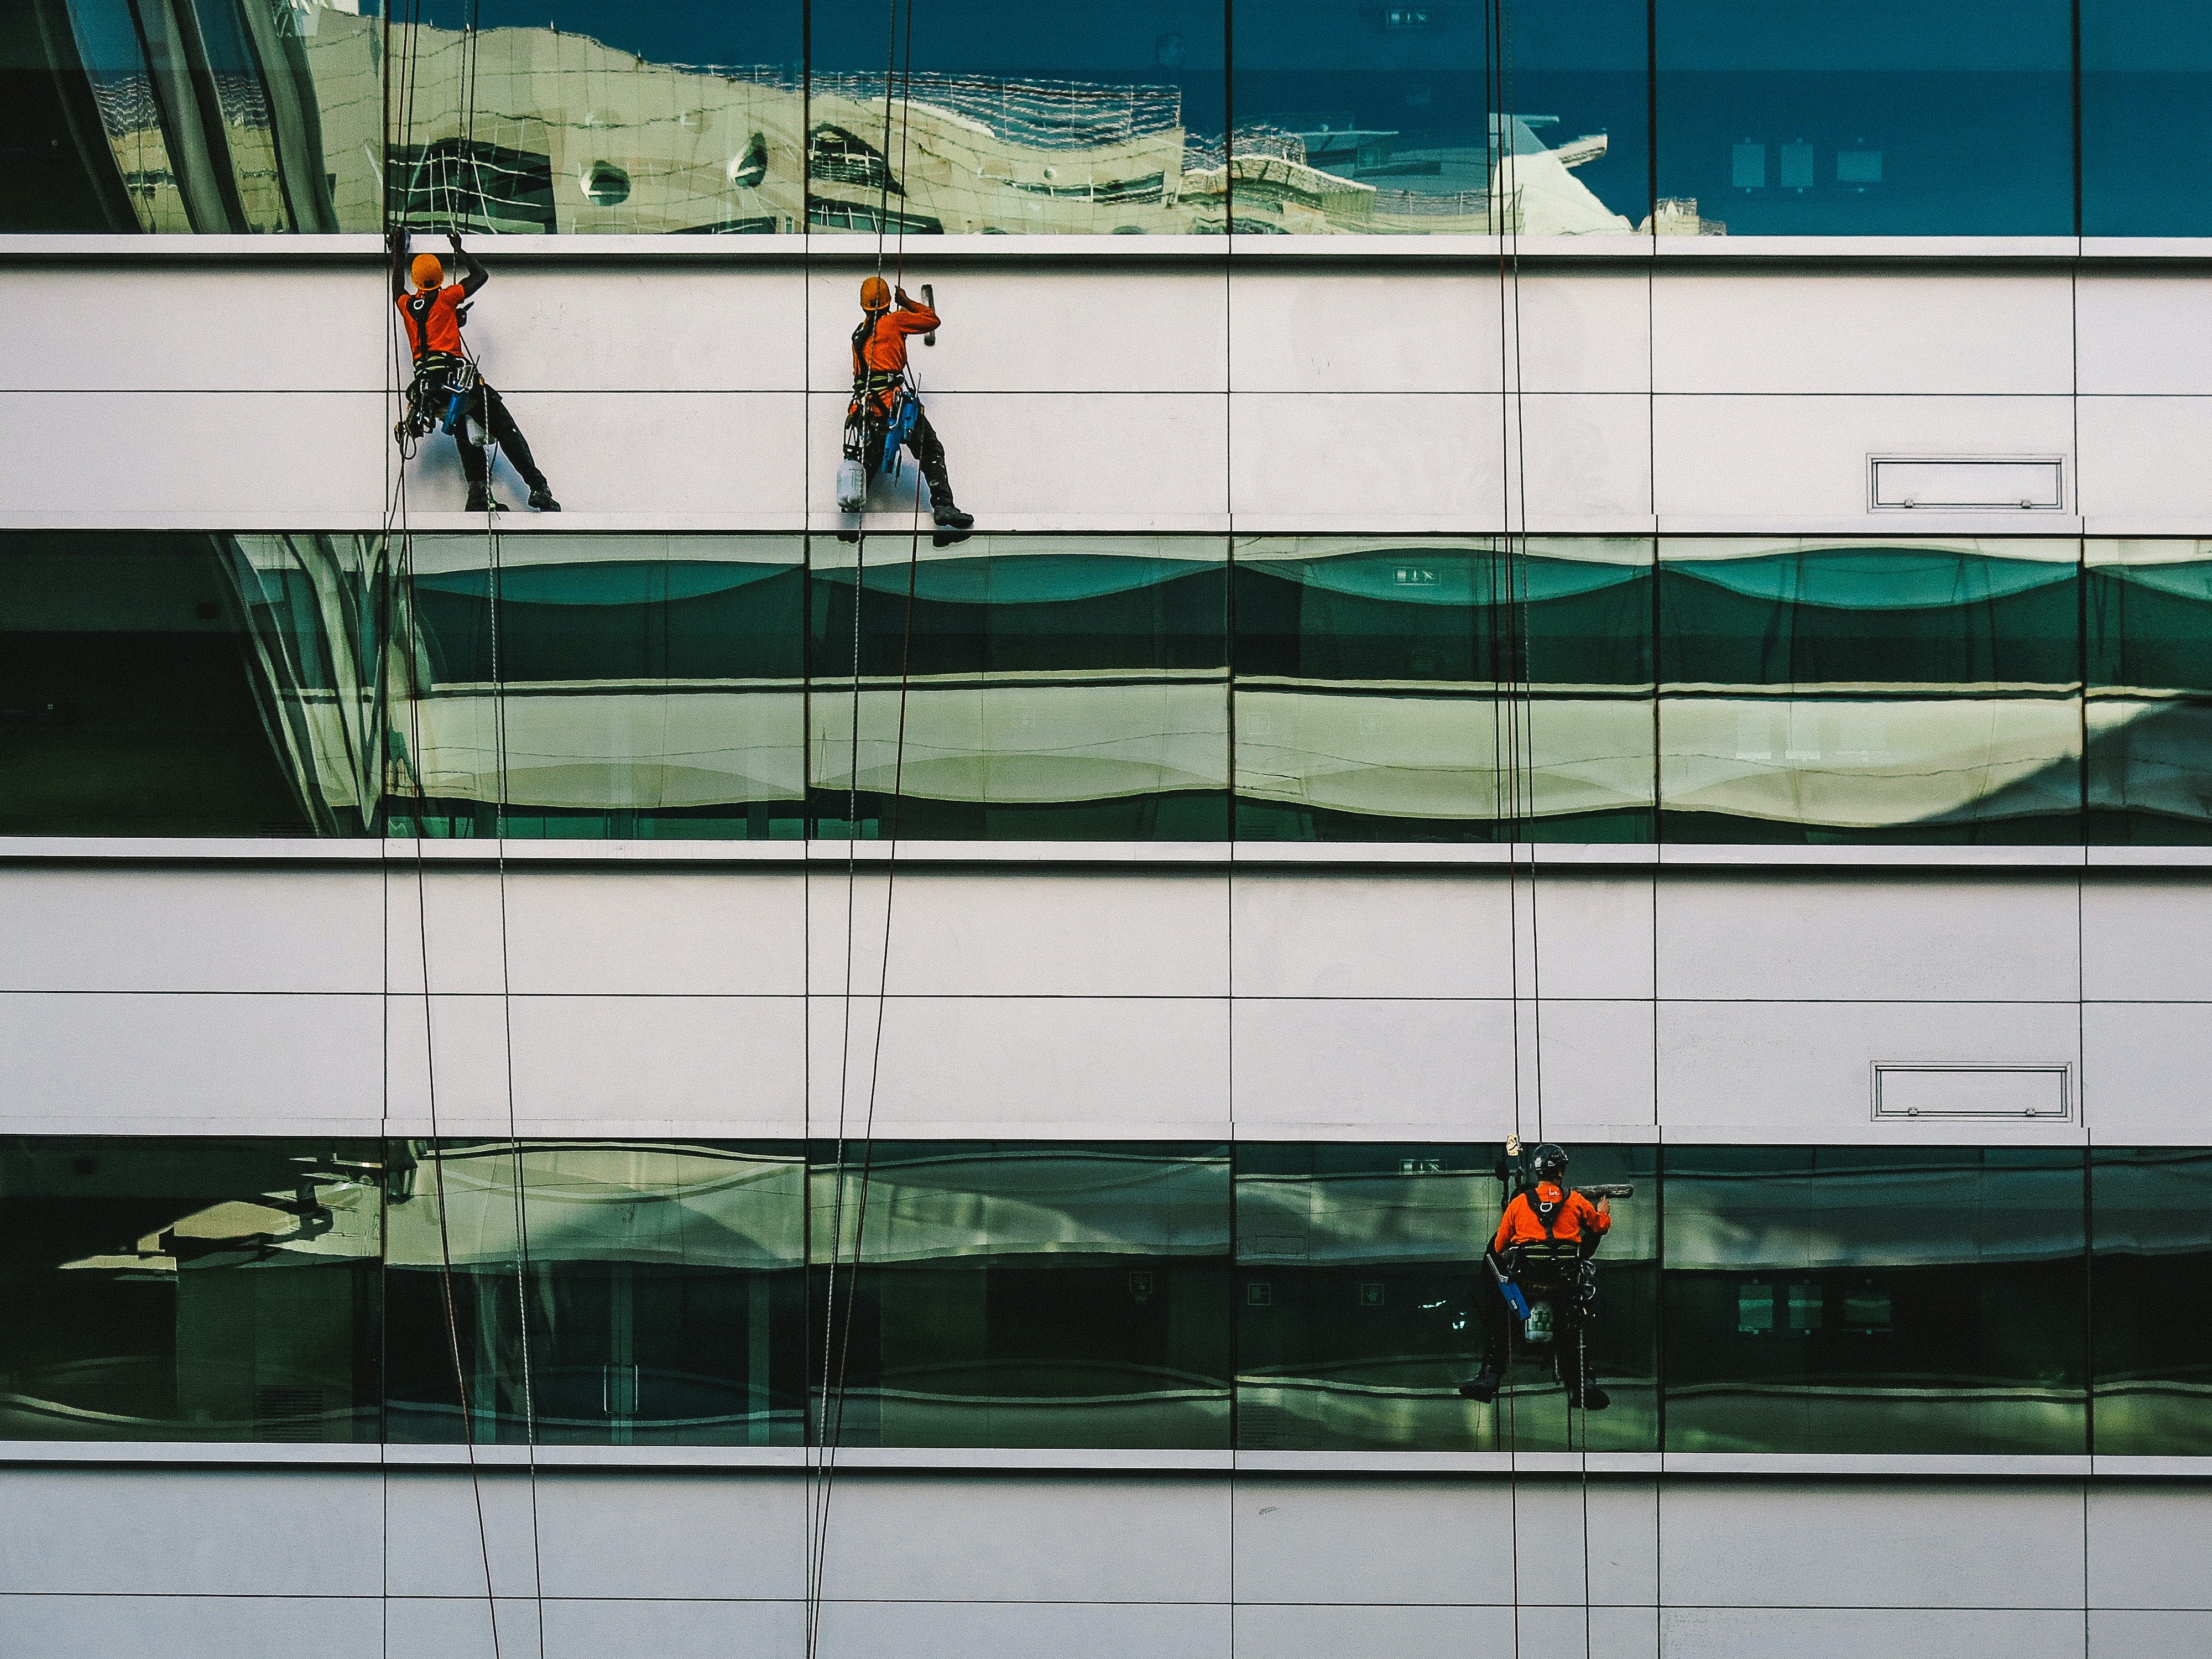 Get Ahead in Business: Find Commercial Cleaning Services Like a Pro.